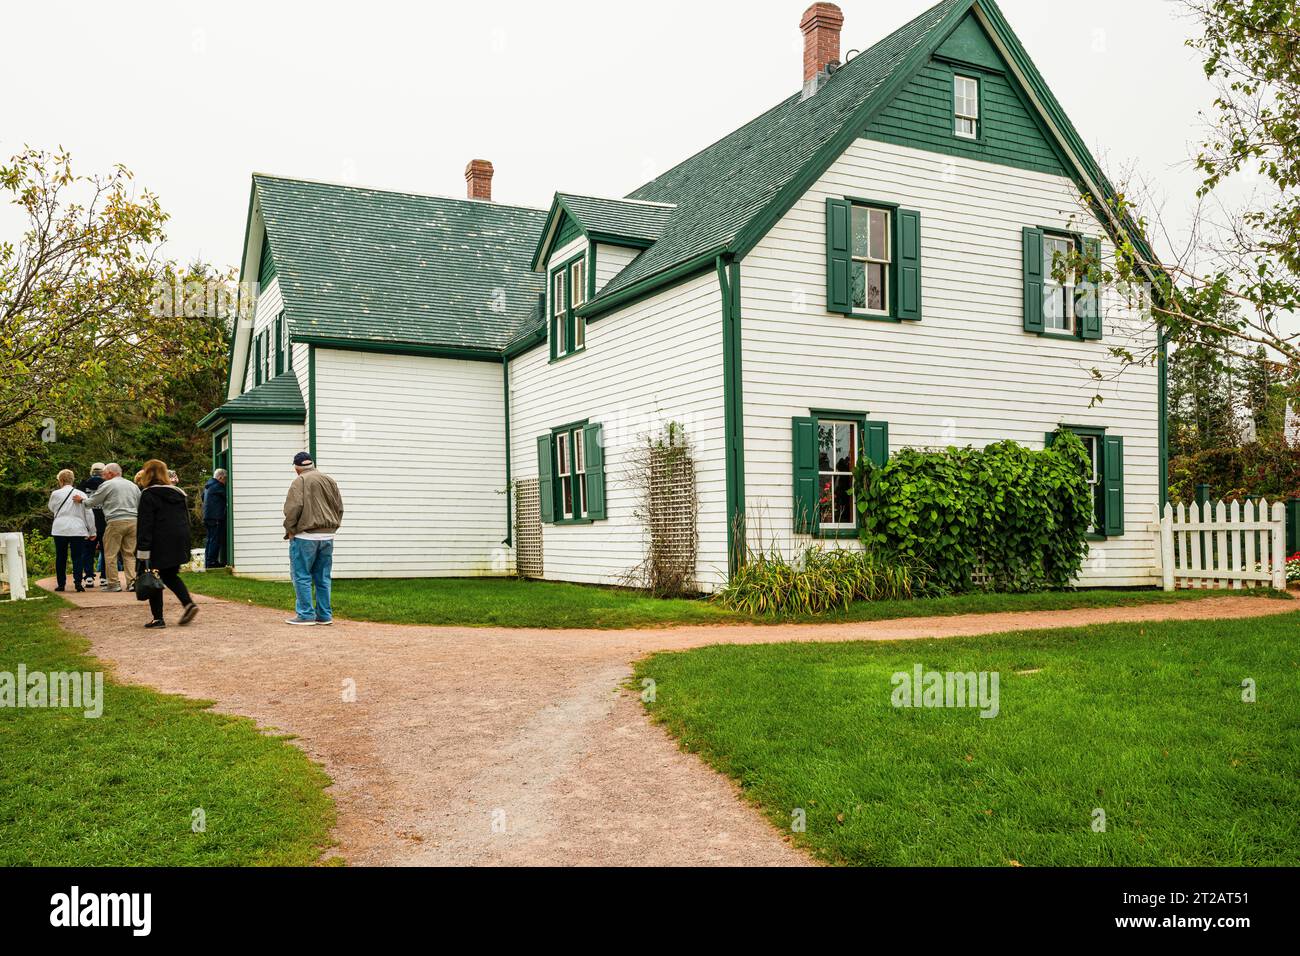 Green Gables Green Gables Heritage Place   Cavendish, Prince Edward Island, CAN Foto Stock